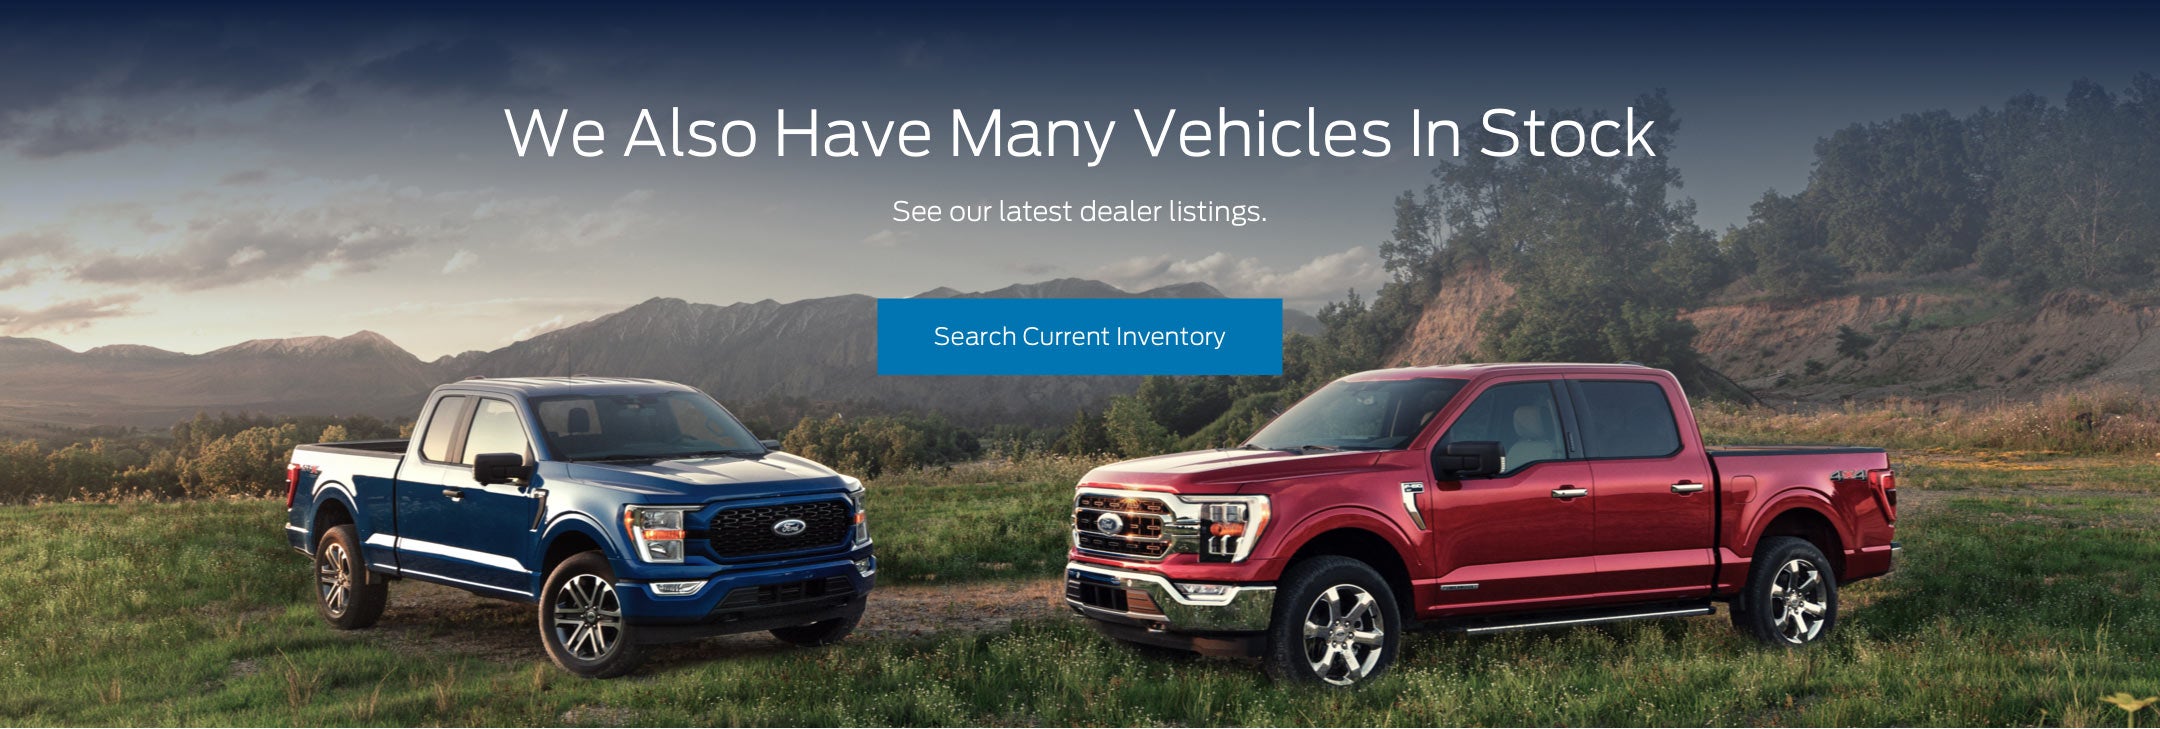 Ford vehicles in stock | Mission Valley Ford in San Jose CA